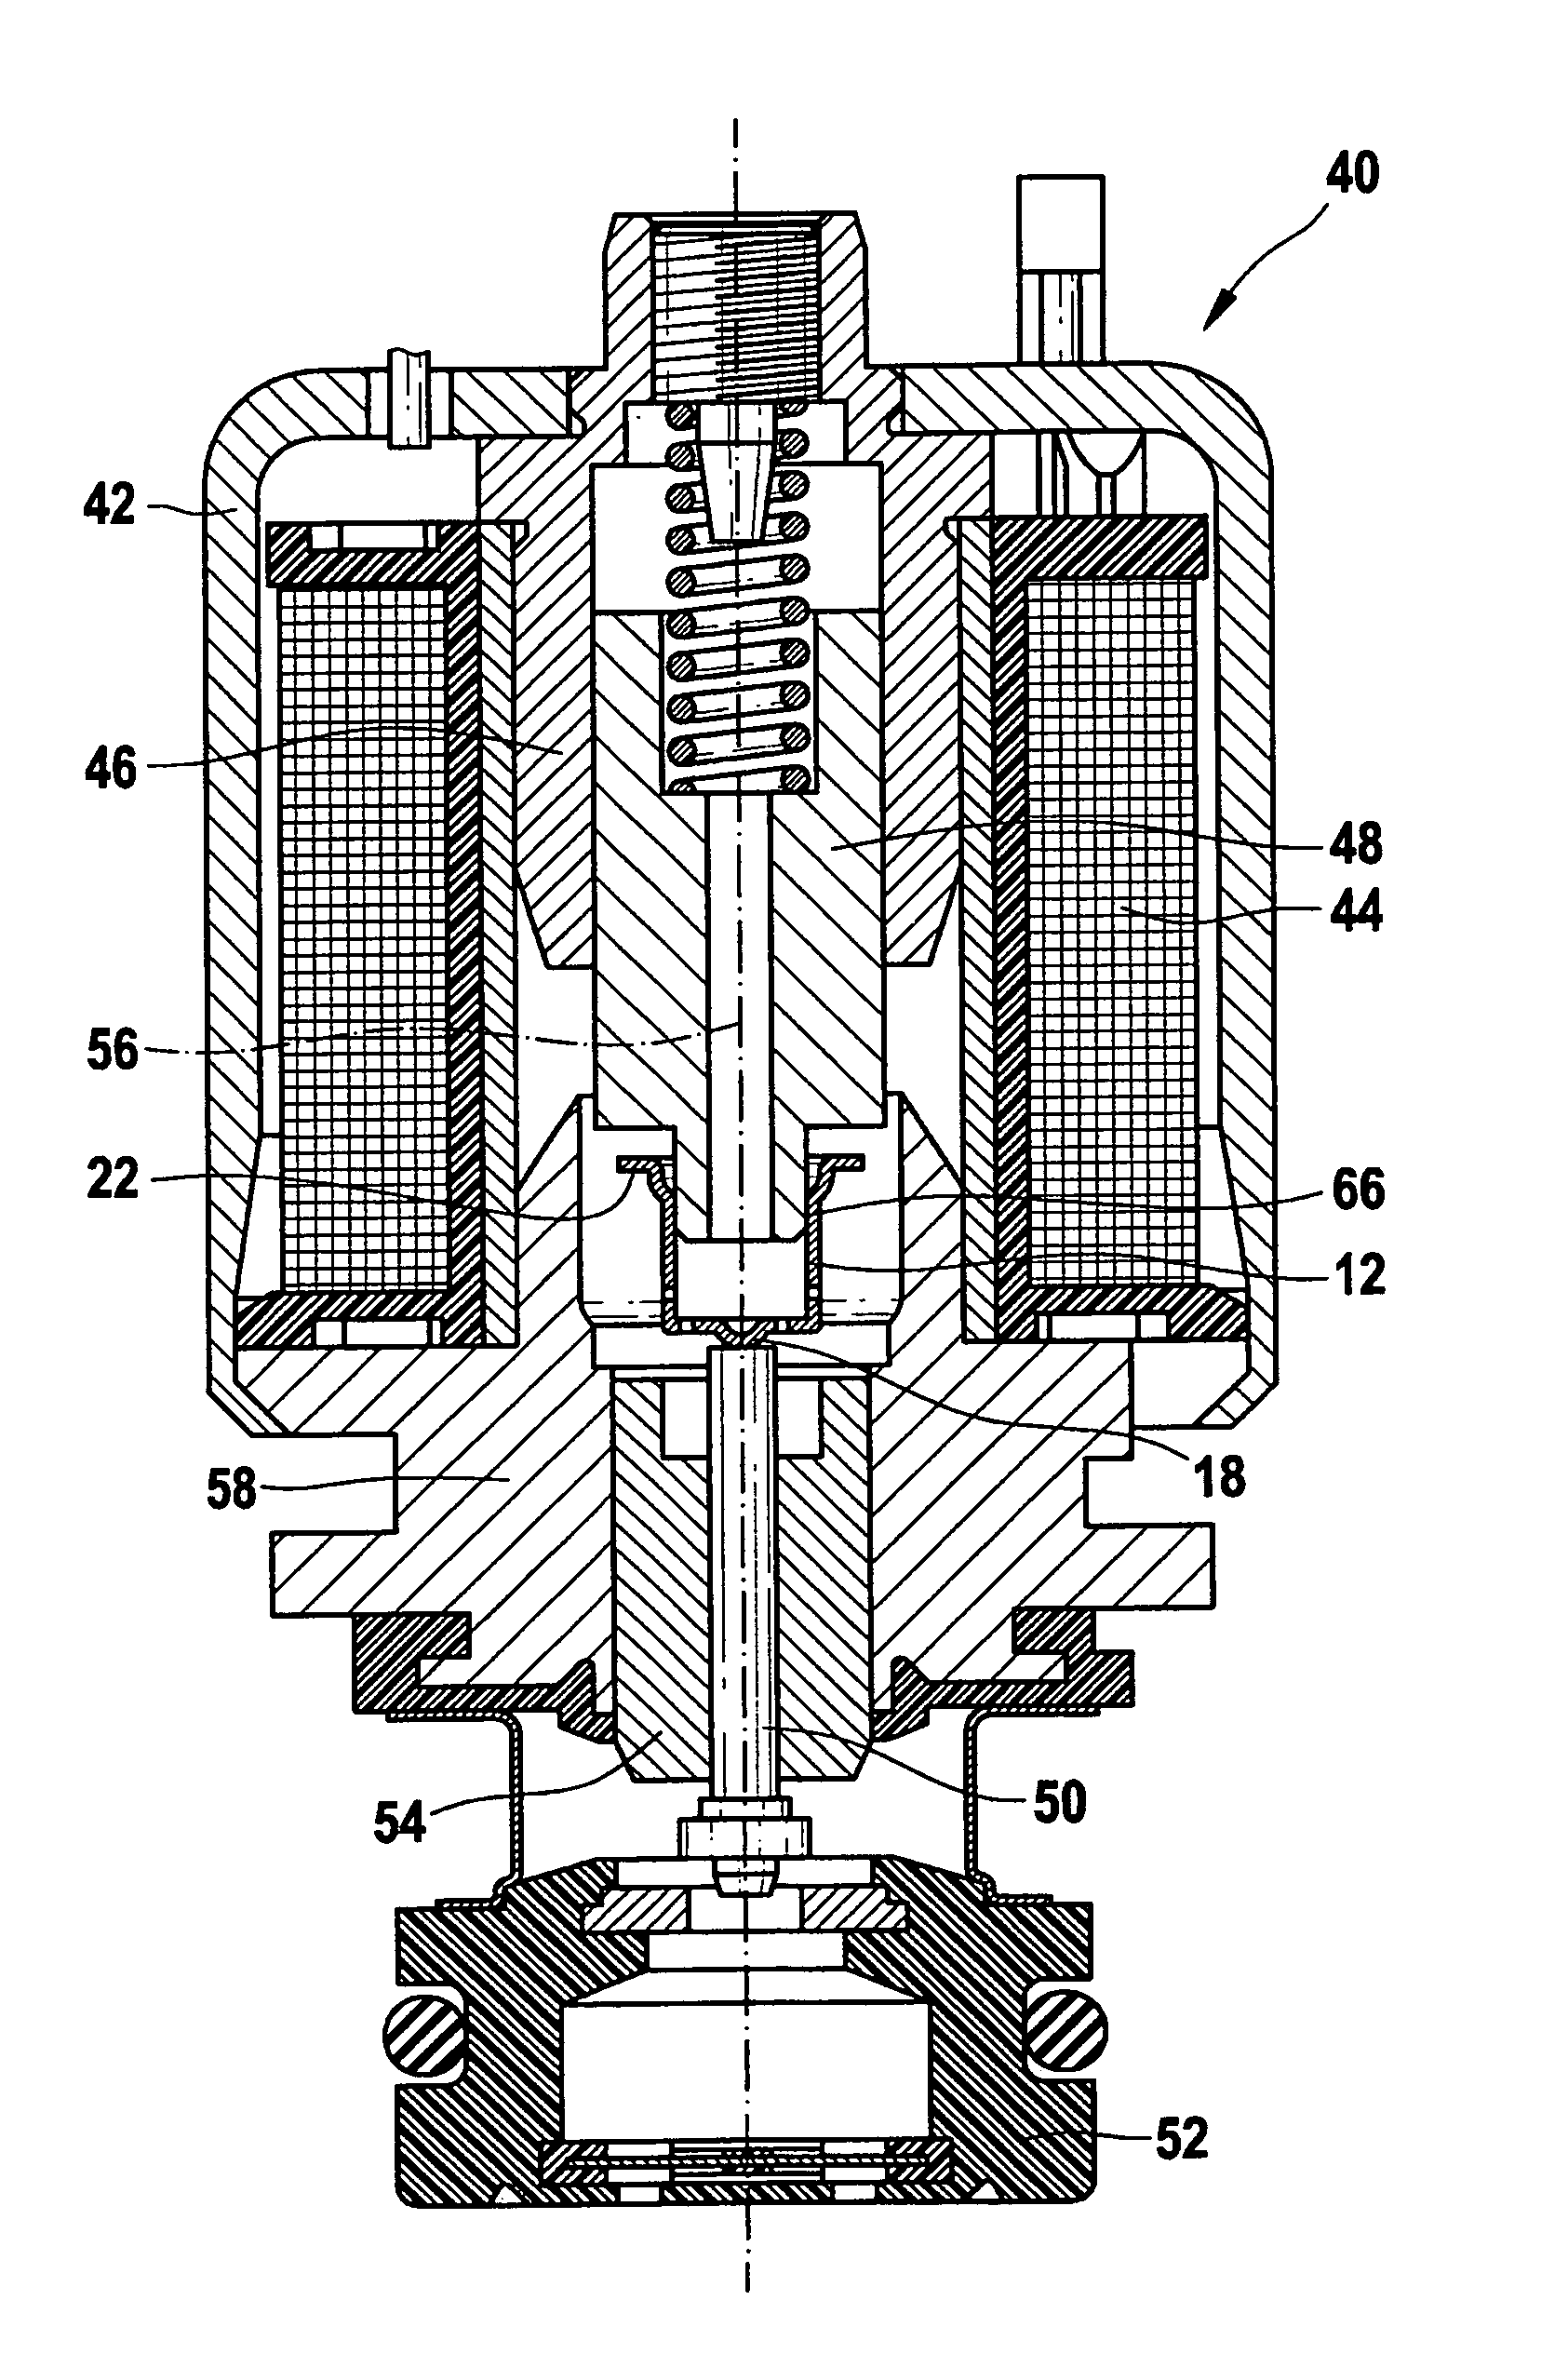 Device for damping the armature stroke in solenoid valves